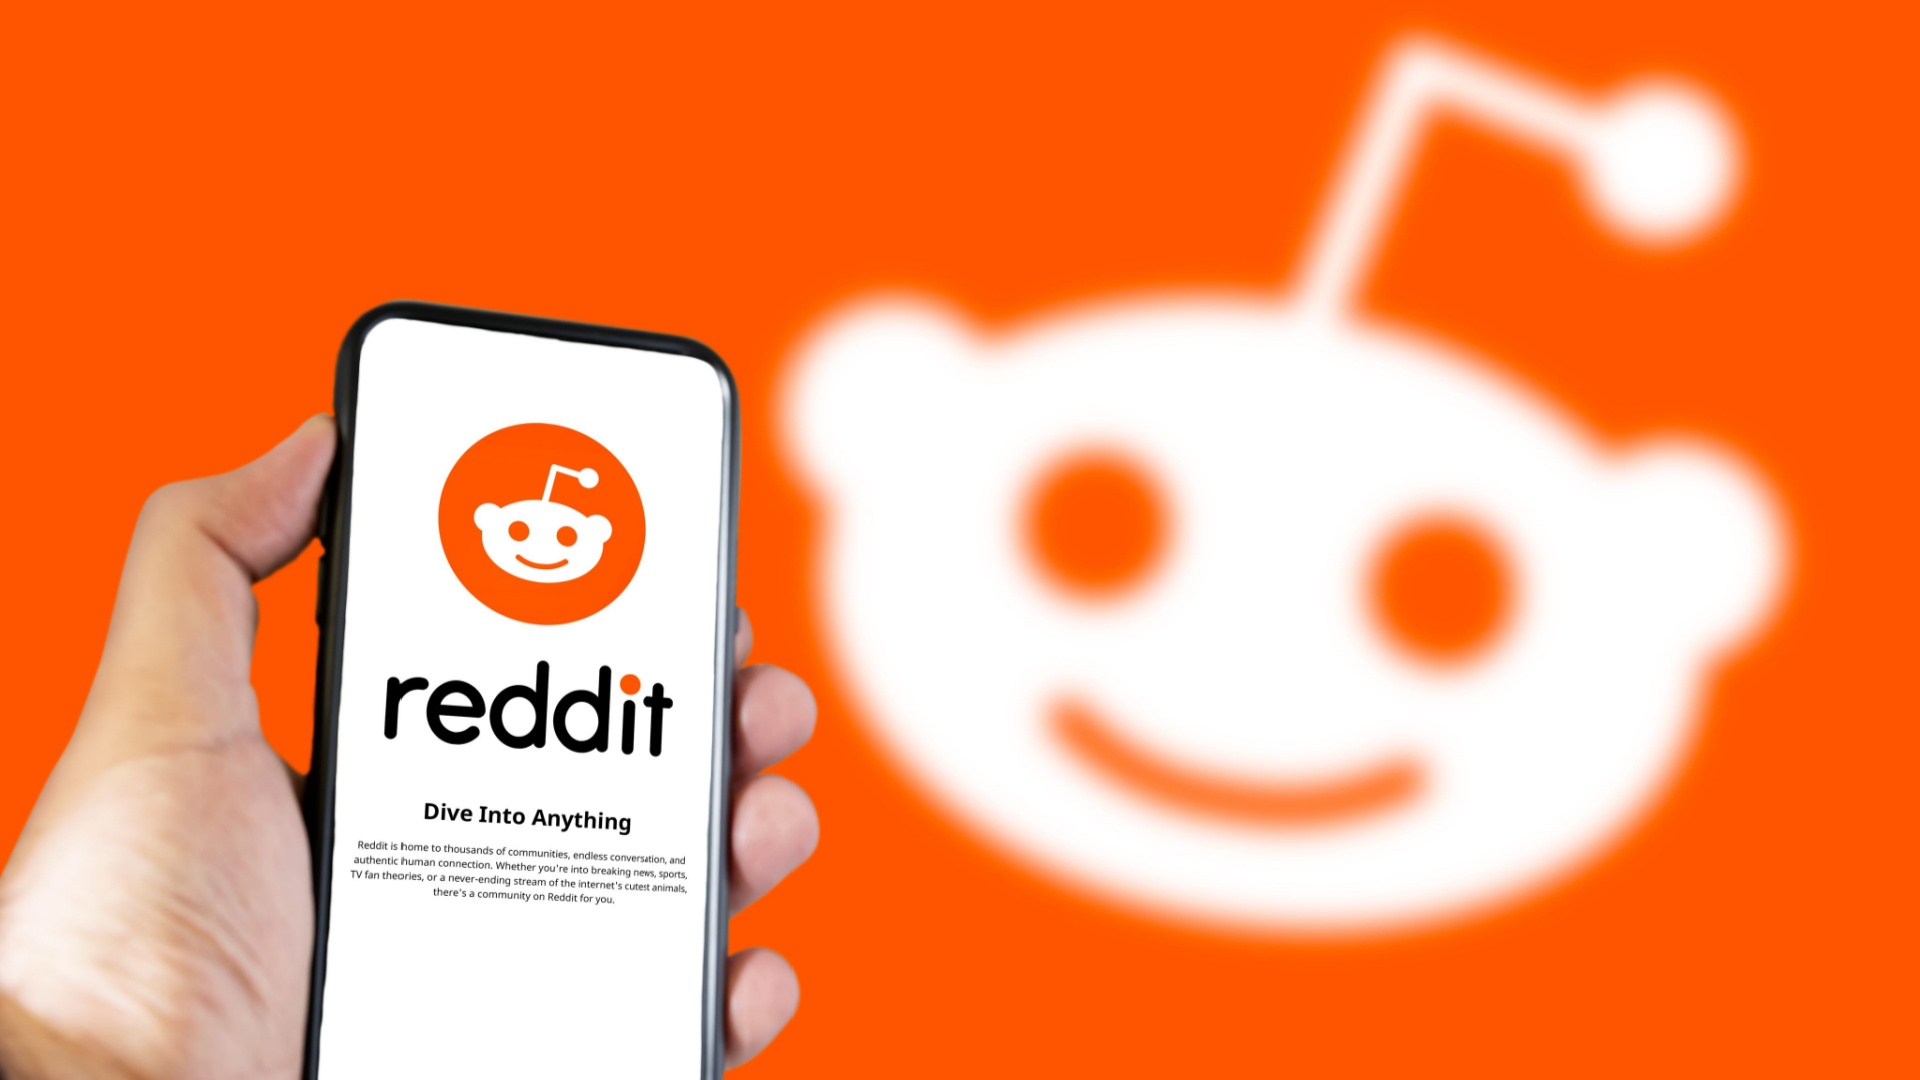 Reddit – Millions of users have already adopted his NFT profile pictures